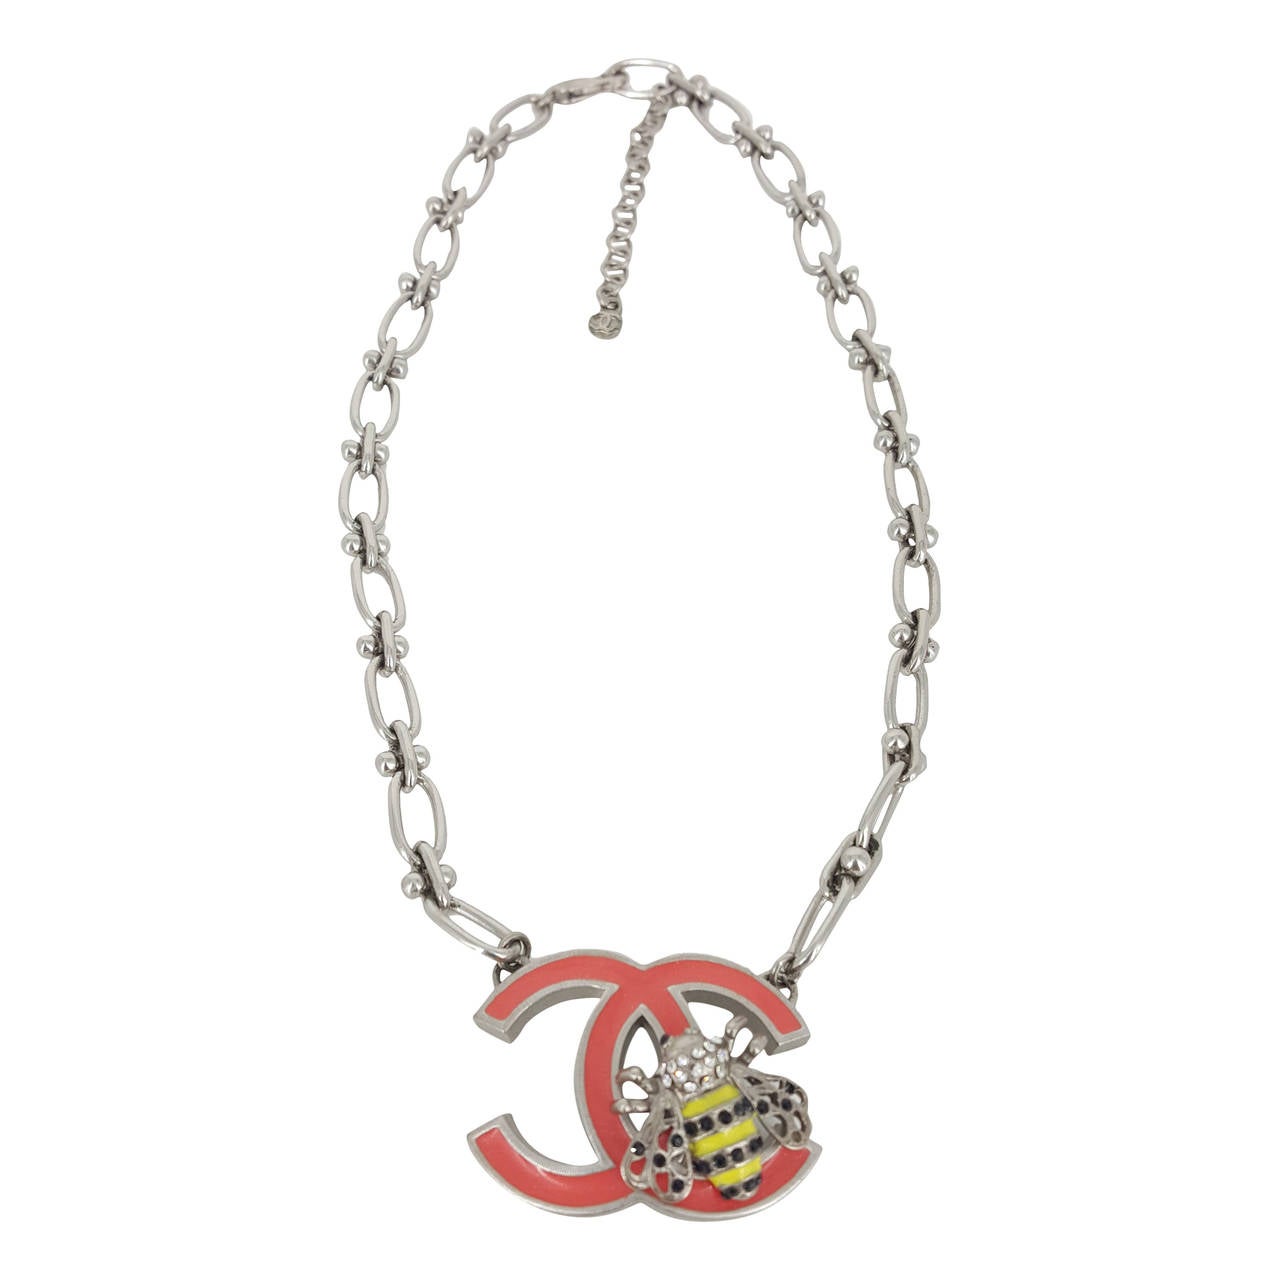 Chanel Bumble Bee "CC" Necklace From 2004.